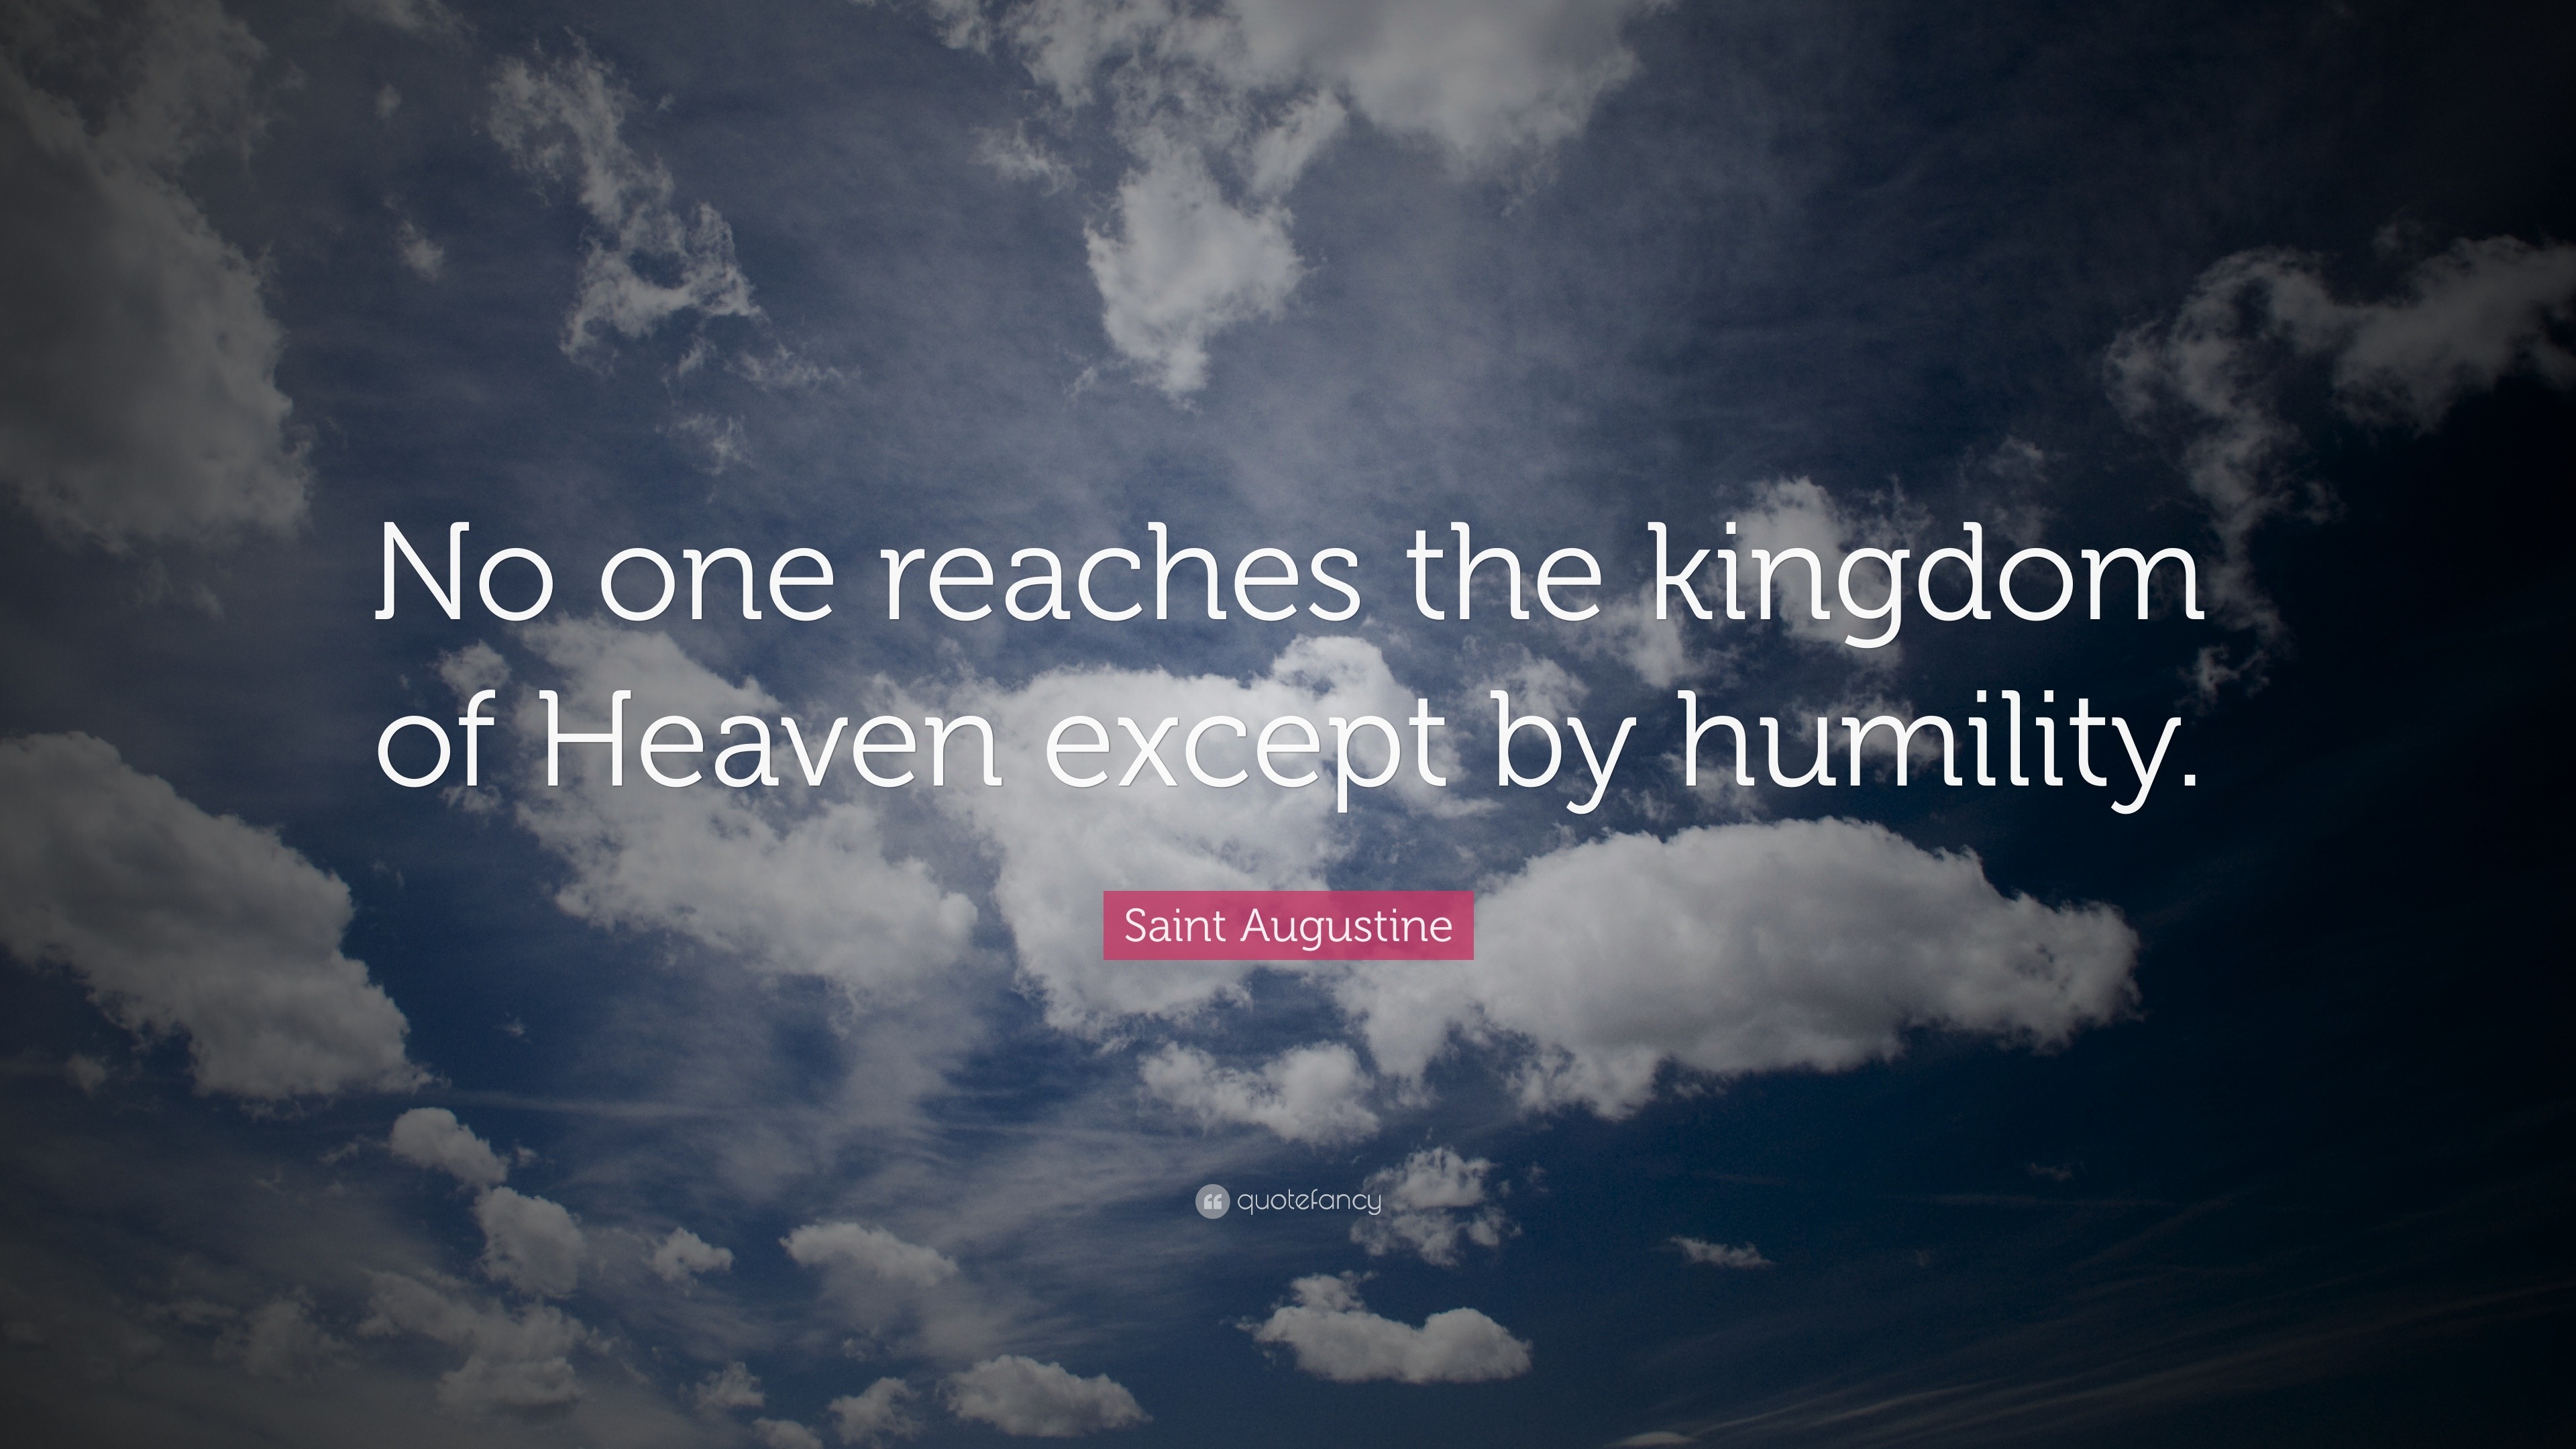 Saint Augustine Quote “No one reaches the kingdom of